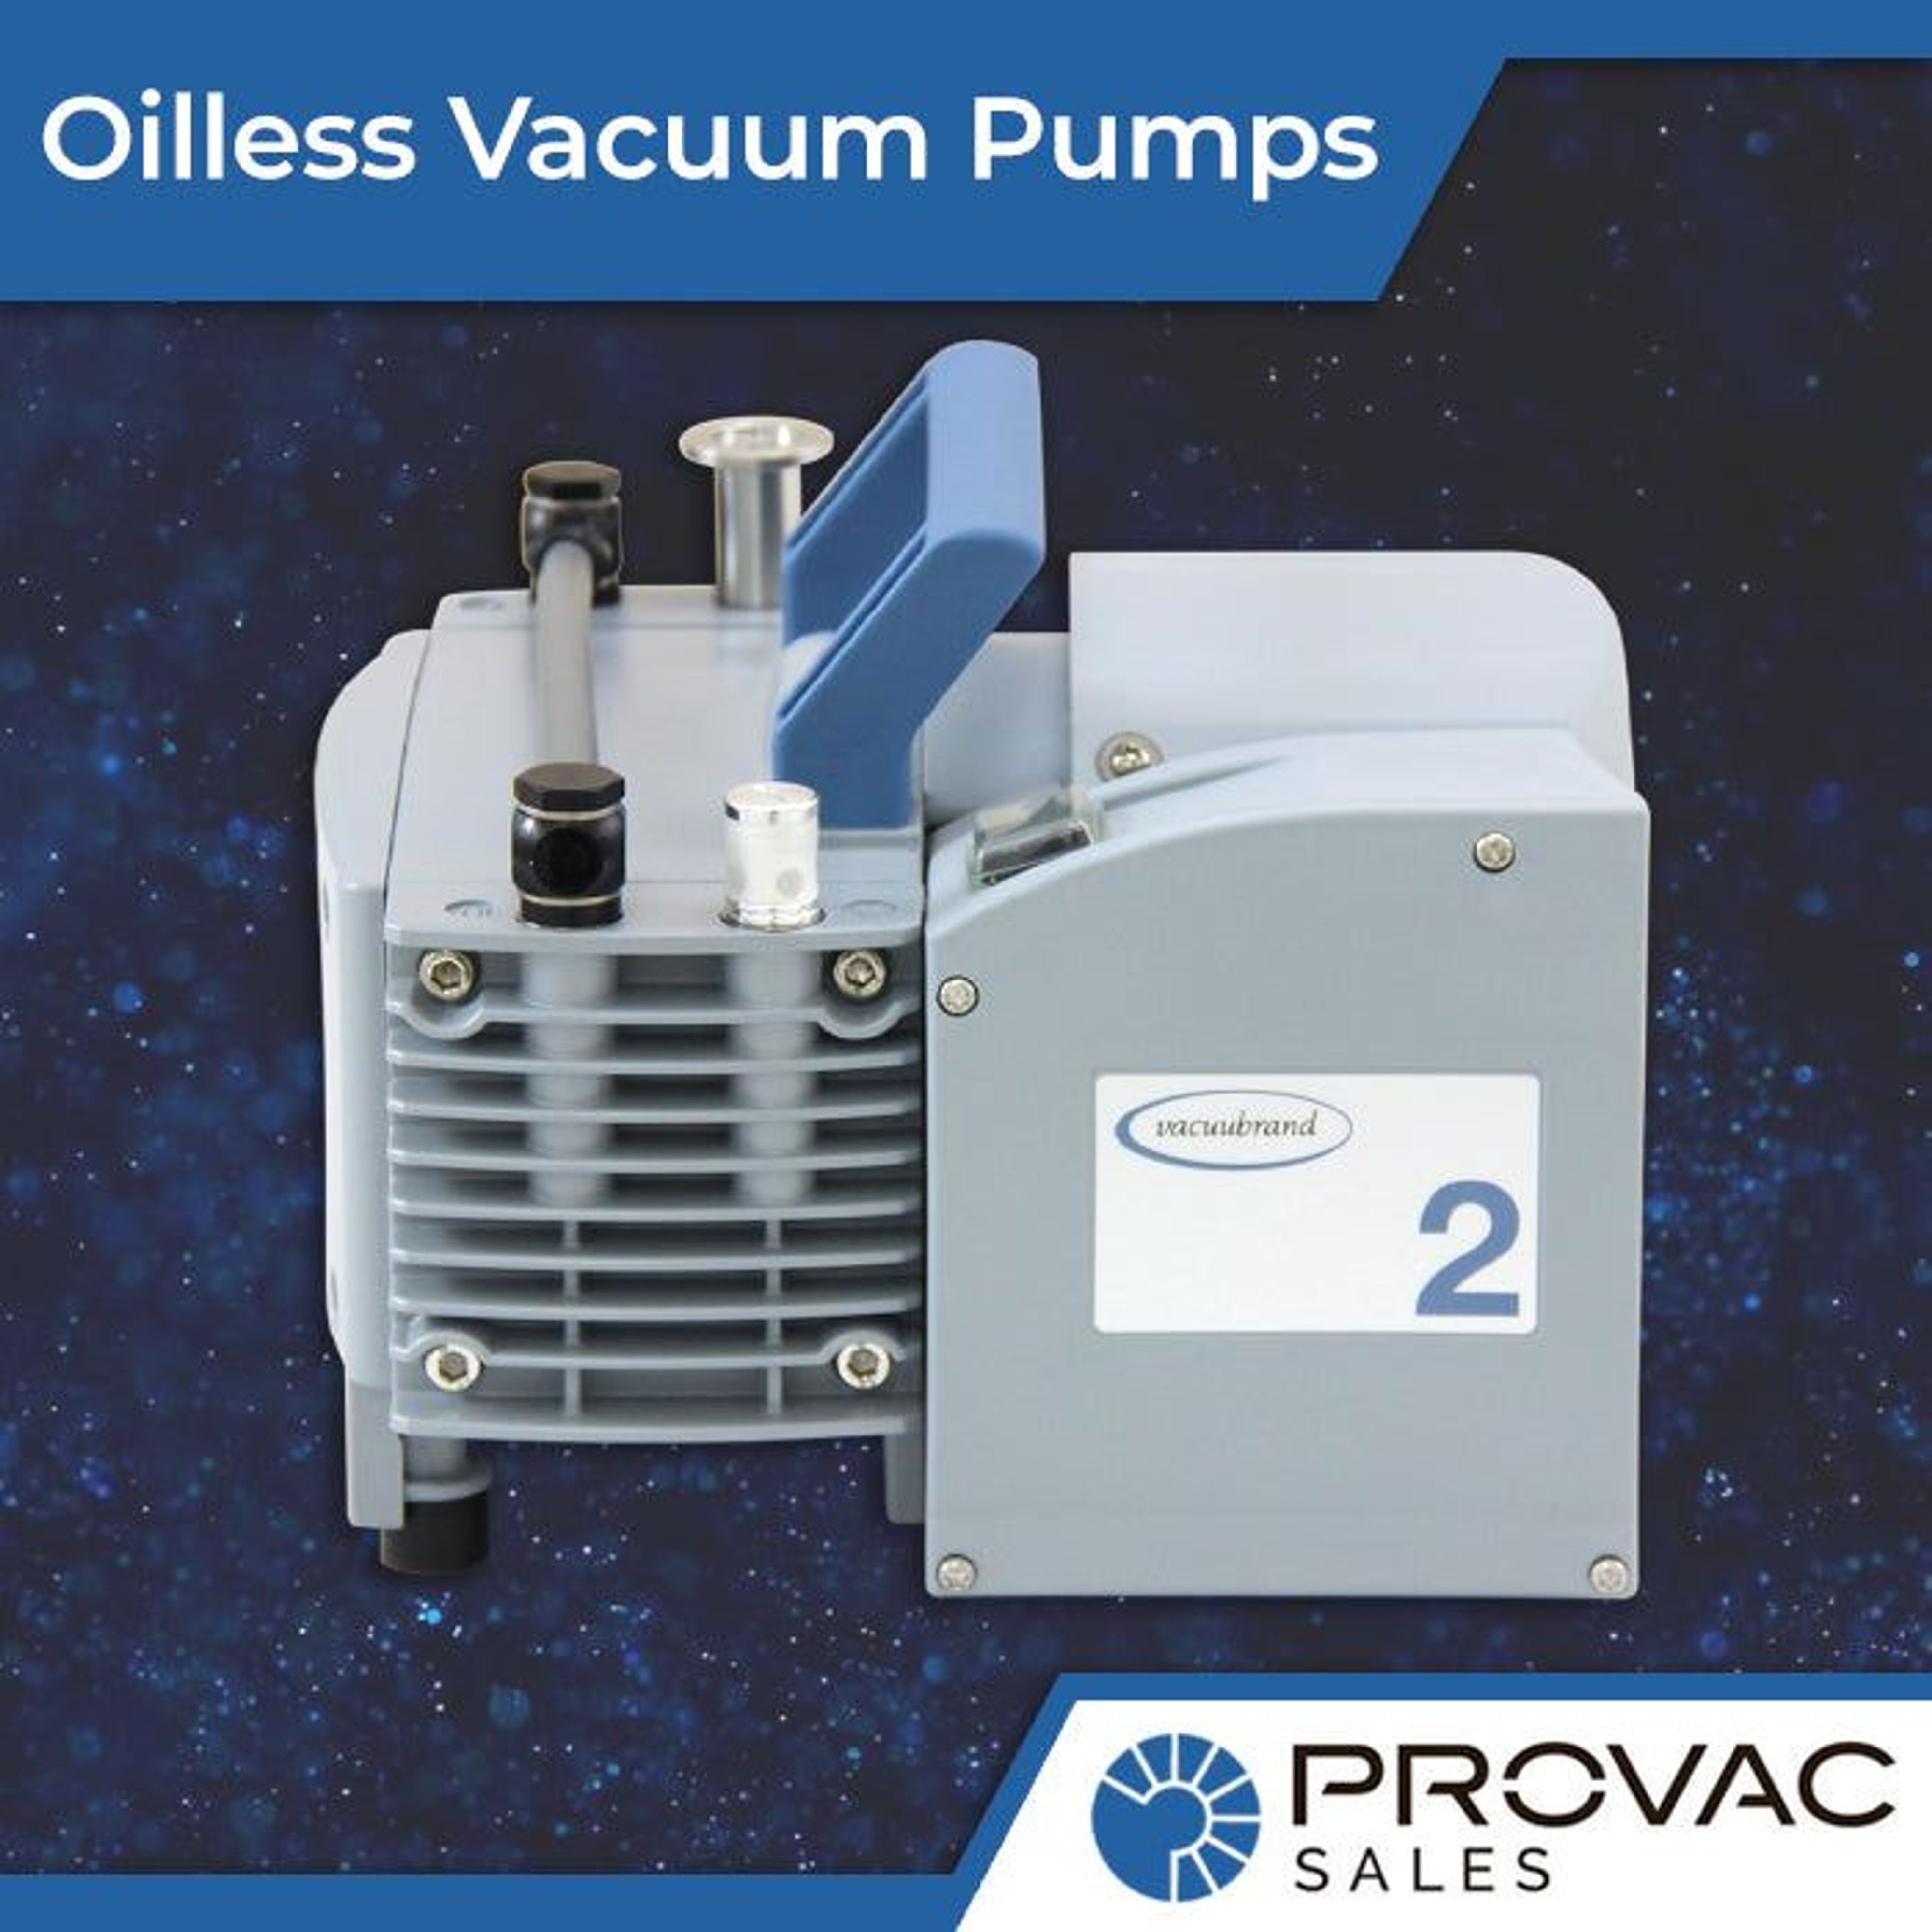 Oilless Vacuum Pumps - Benefits & How To Buy The Right One